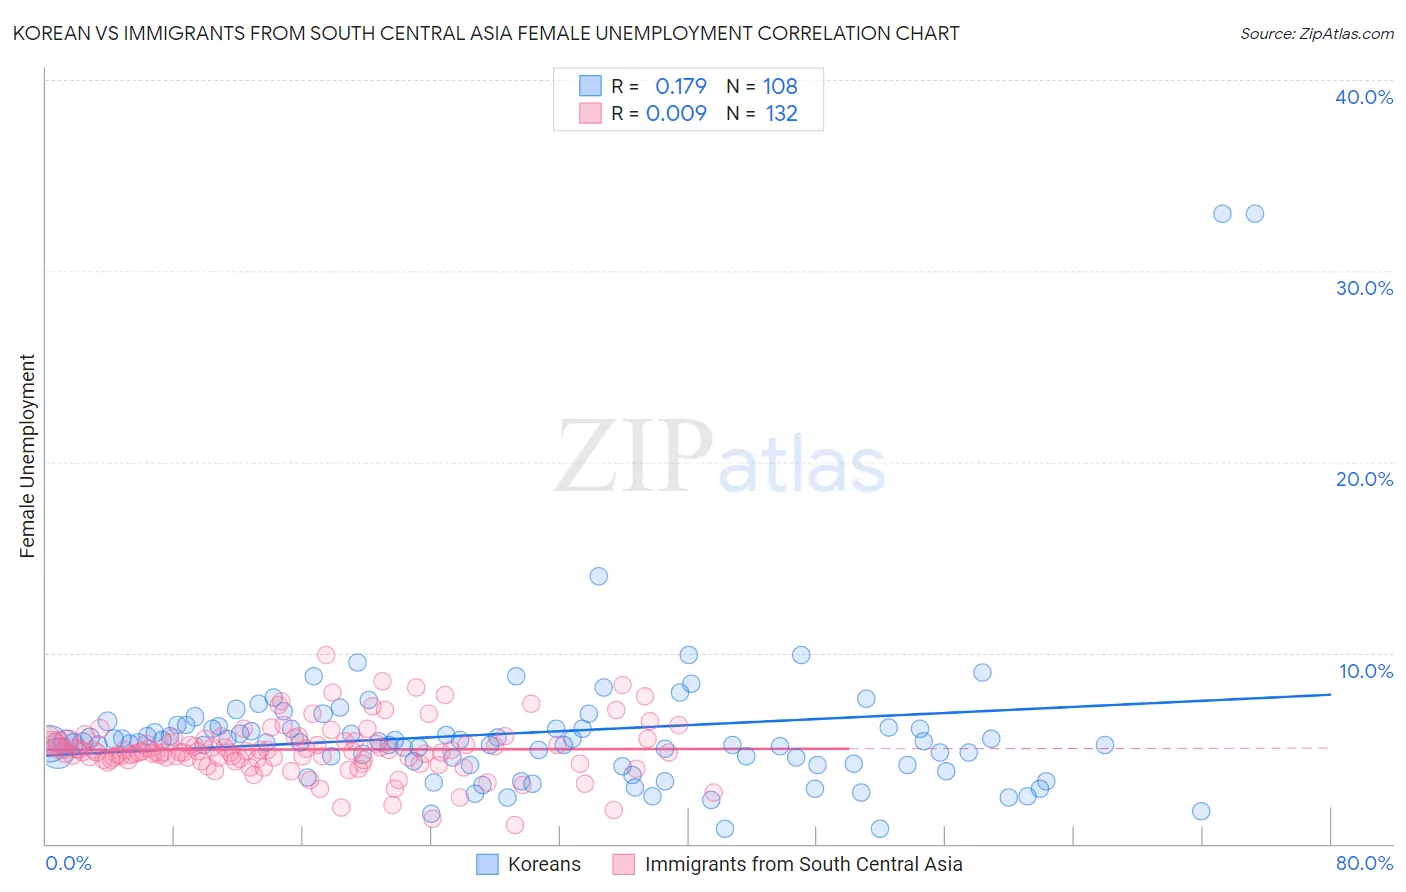 Korean vs Immigrants from South Central Asia Female Unemployment